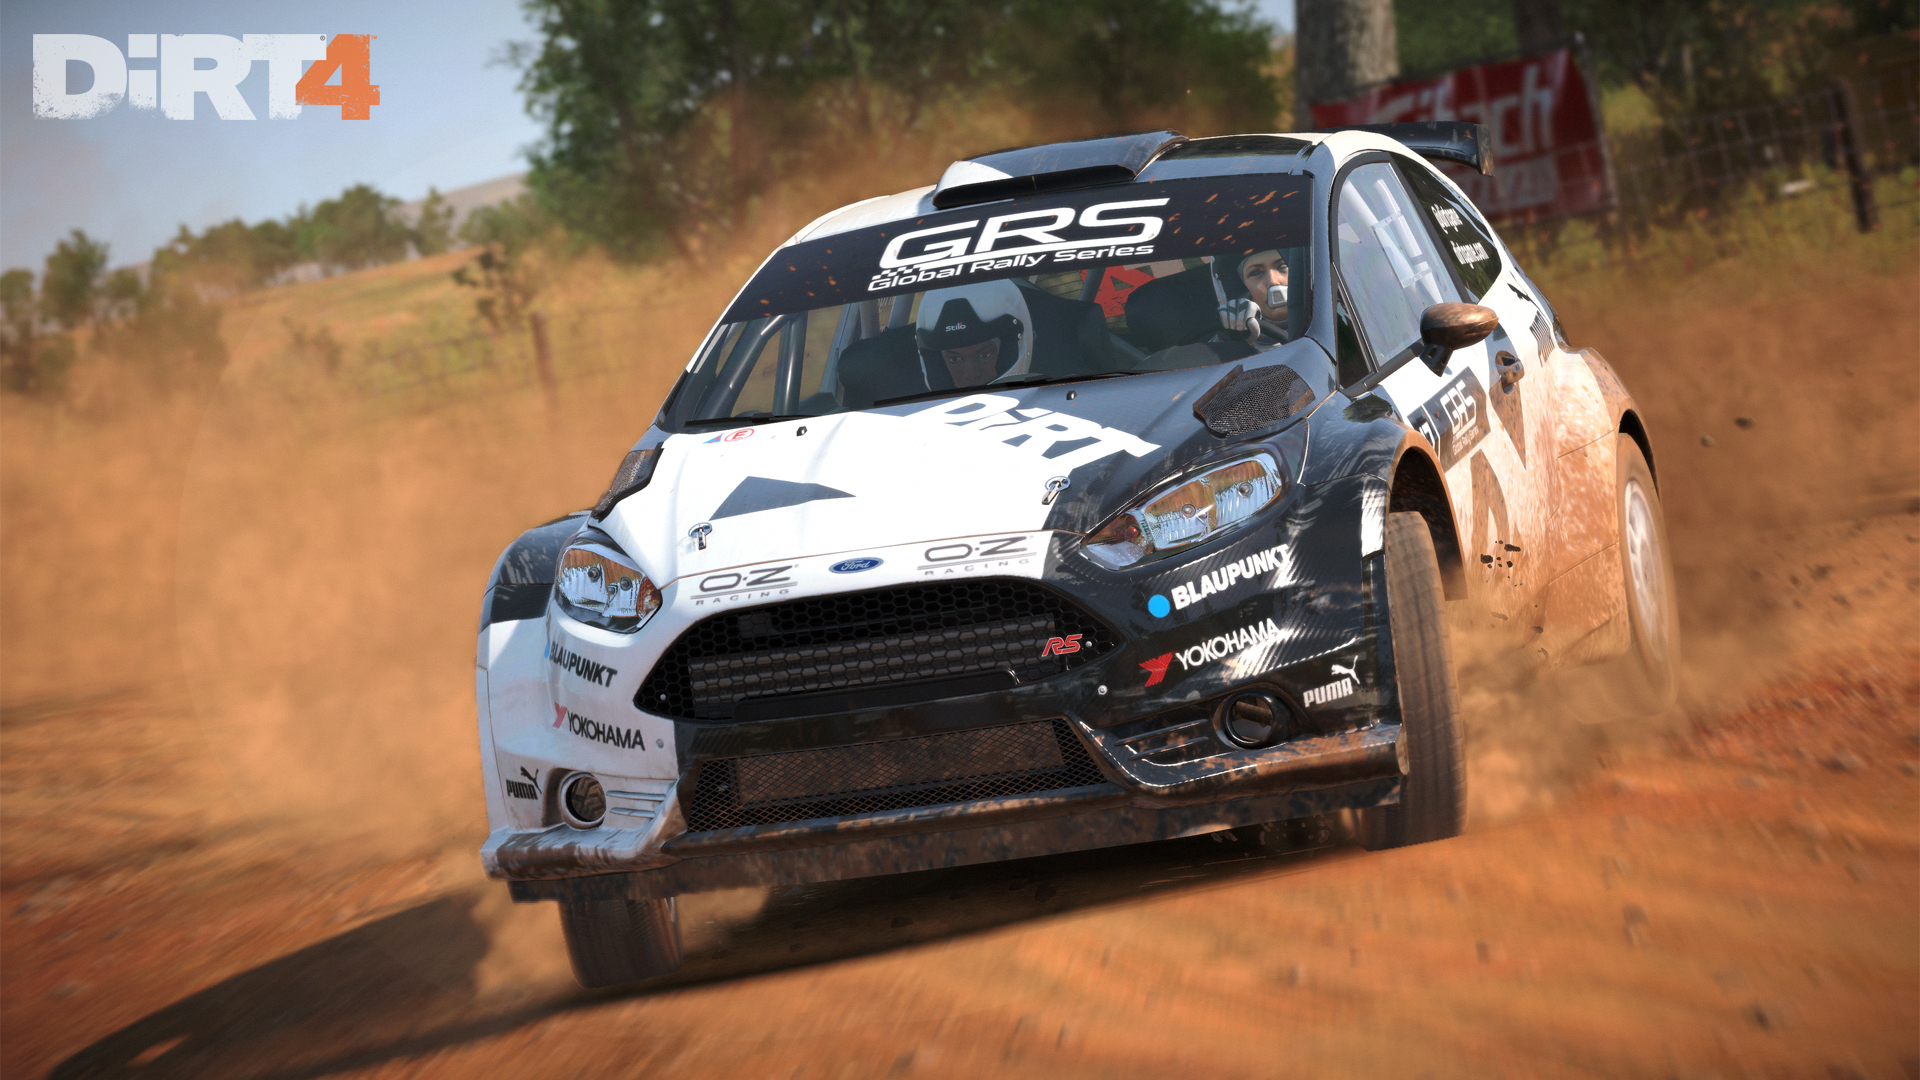 Dirt 4 Wallpapers, Pictures, Images